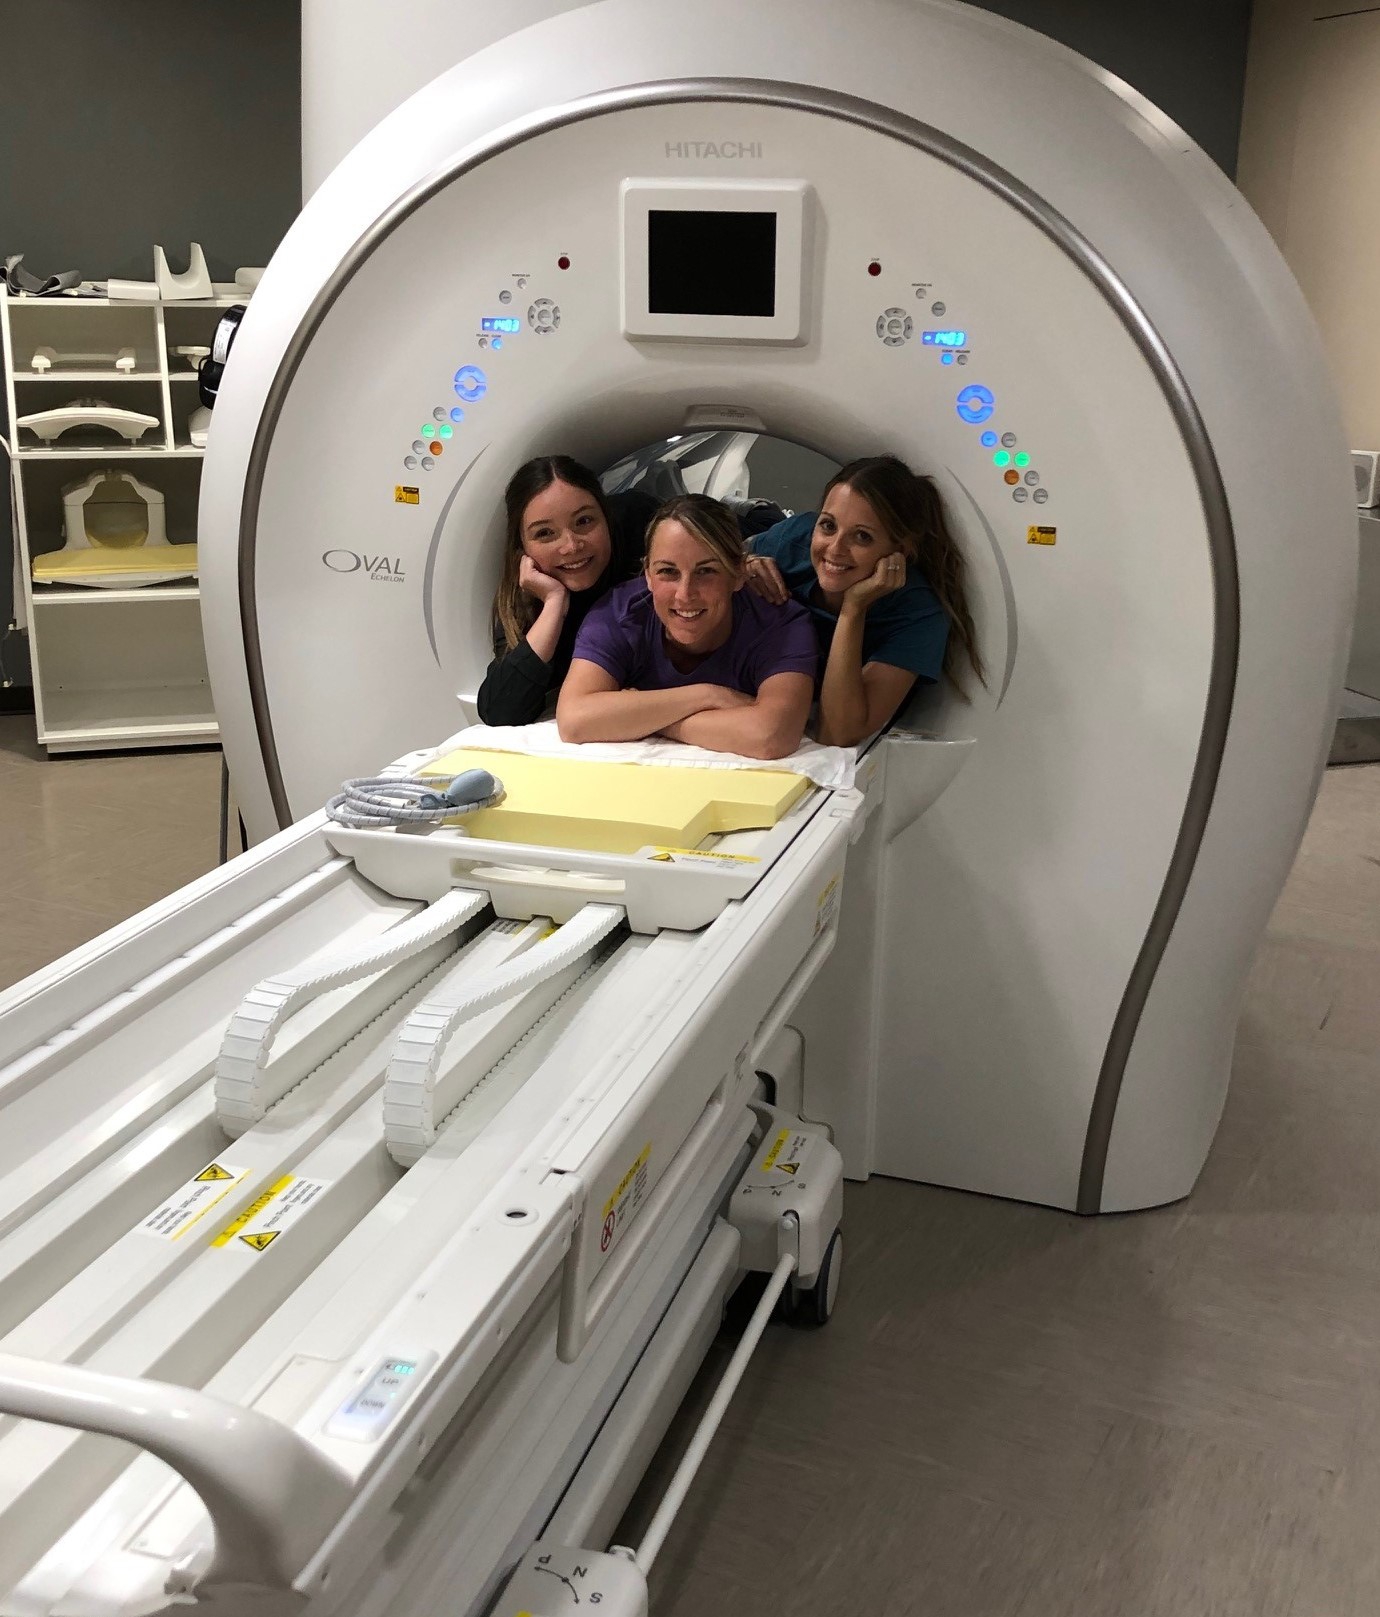 New CHCS MRI offers widebore opening, optimal images Community